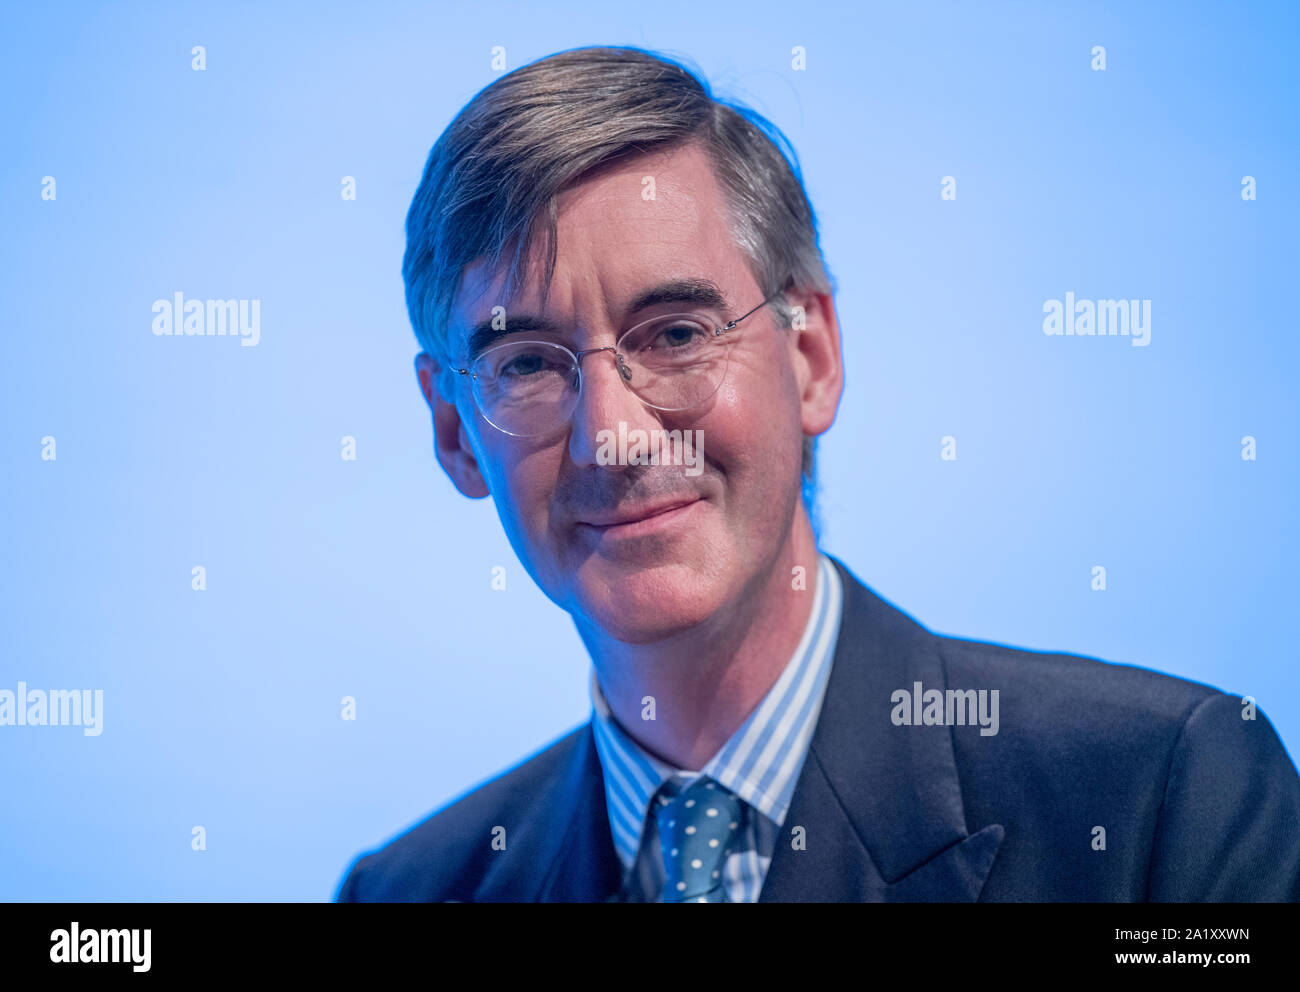 Manchester, UK. 29th September 2019. Jacob Rees-Mogg, Leader of the House of Commons, Lord President of the Council and MP for North East Somerset speaks at day one of the Conservative Party Conference in Manchester. © Russell Hart/Alamy Live News. Stock Photo